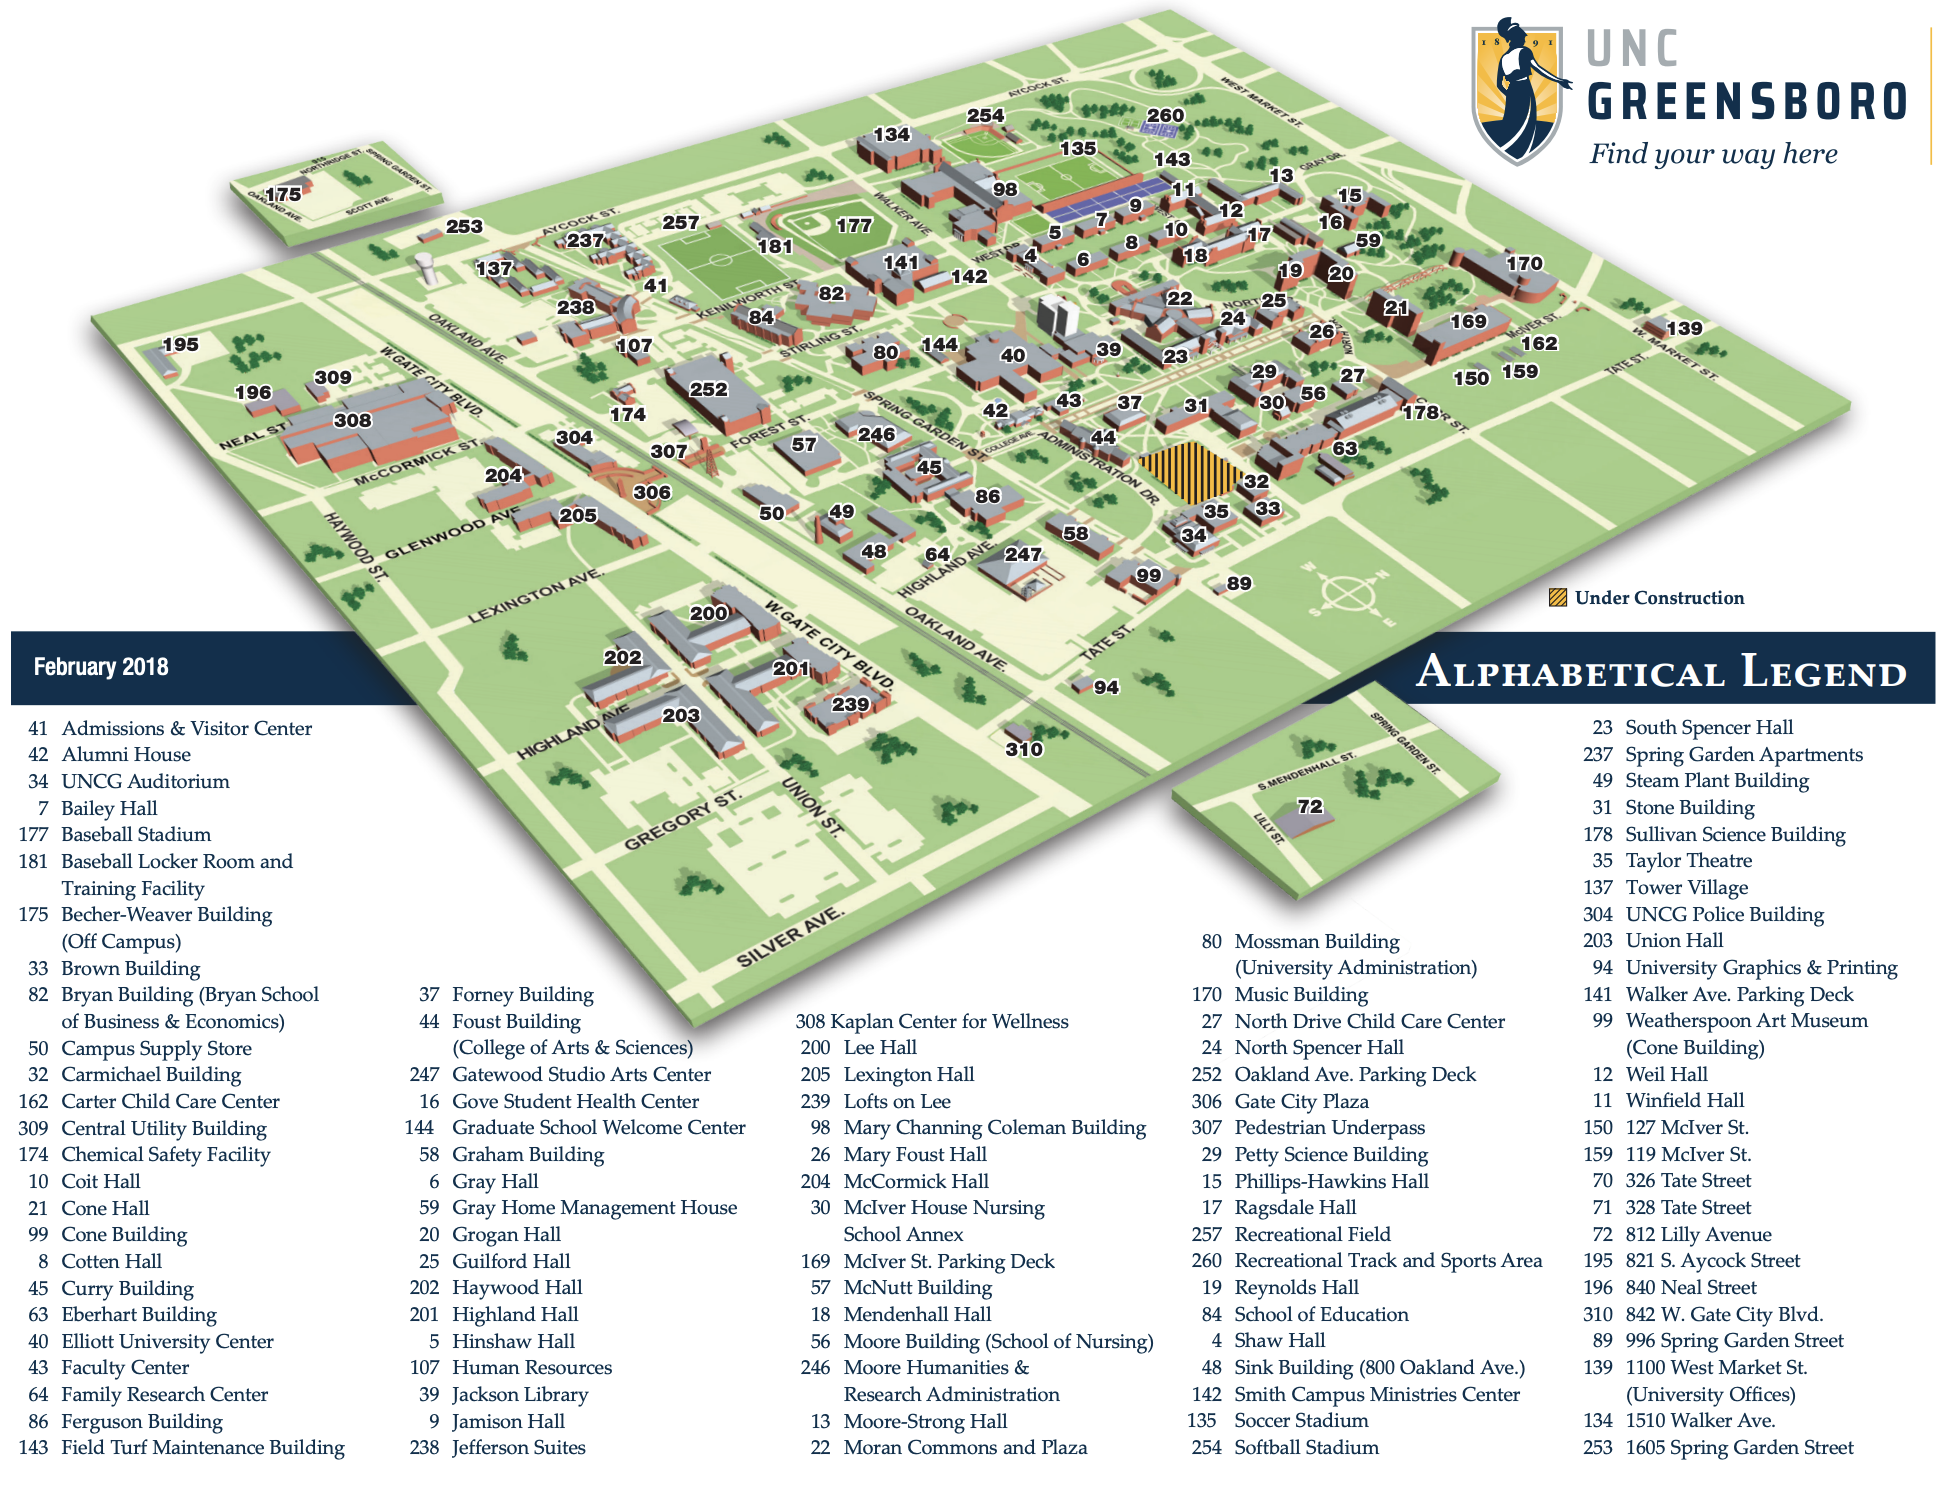 Map of UNCG Campus. Accessible version available at https://www.uncg.edu/online-map/printable/UNCGCampusMapAlpha.pdf